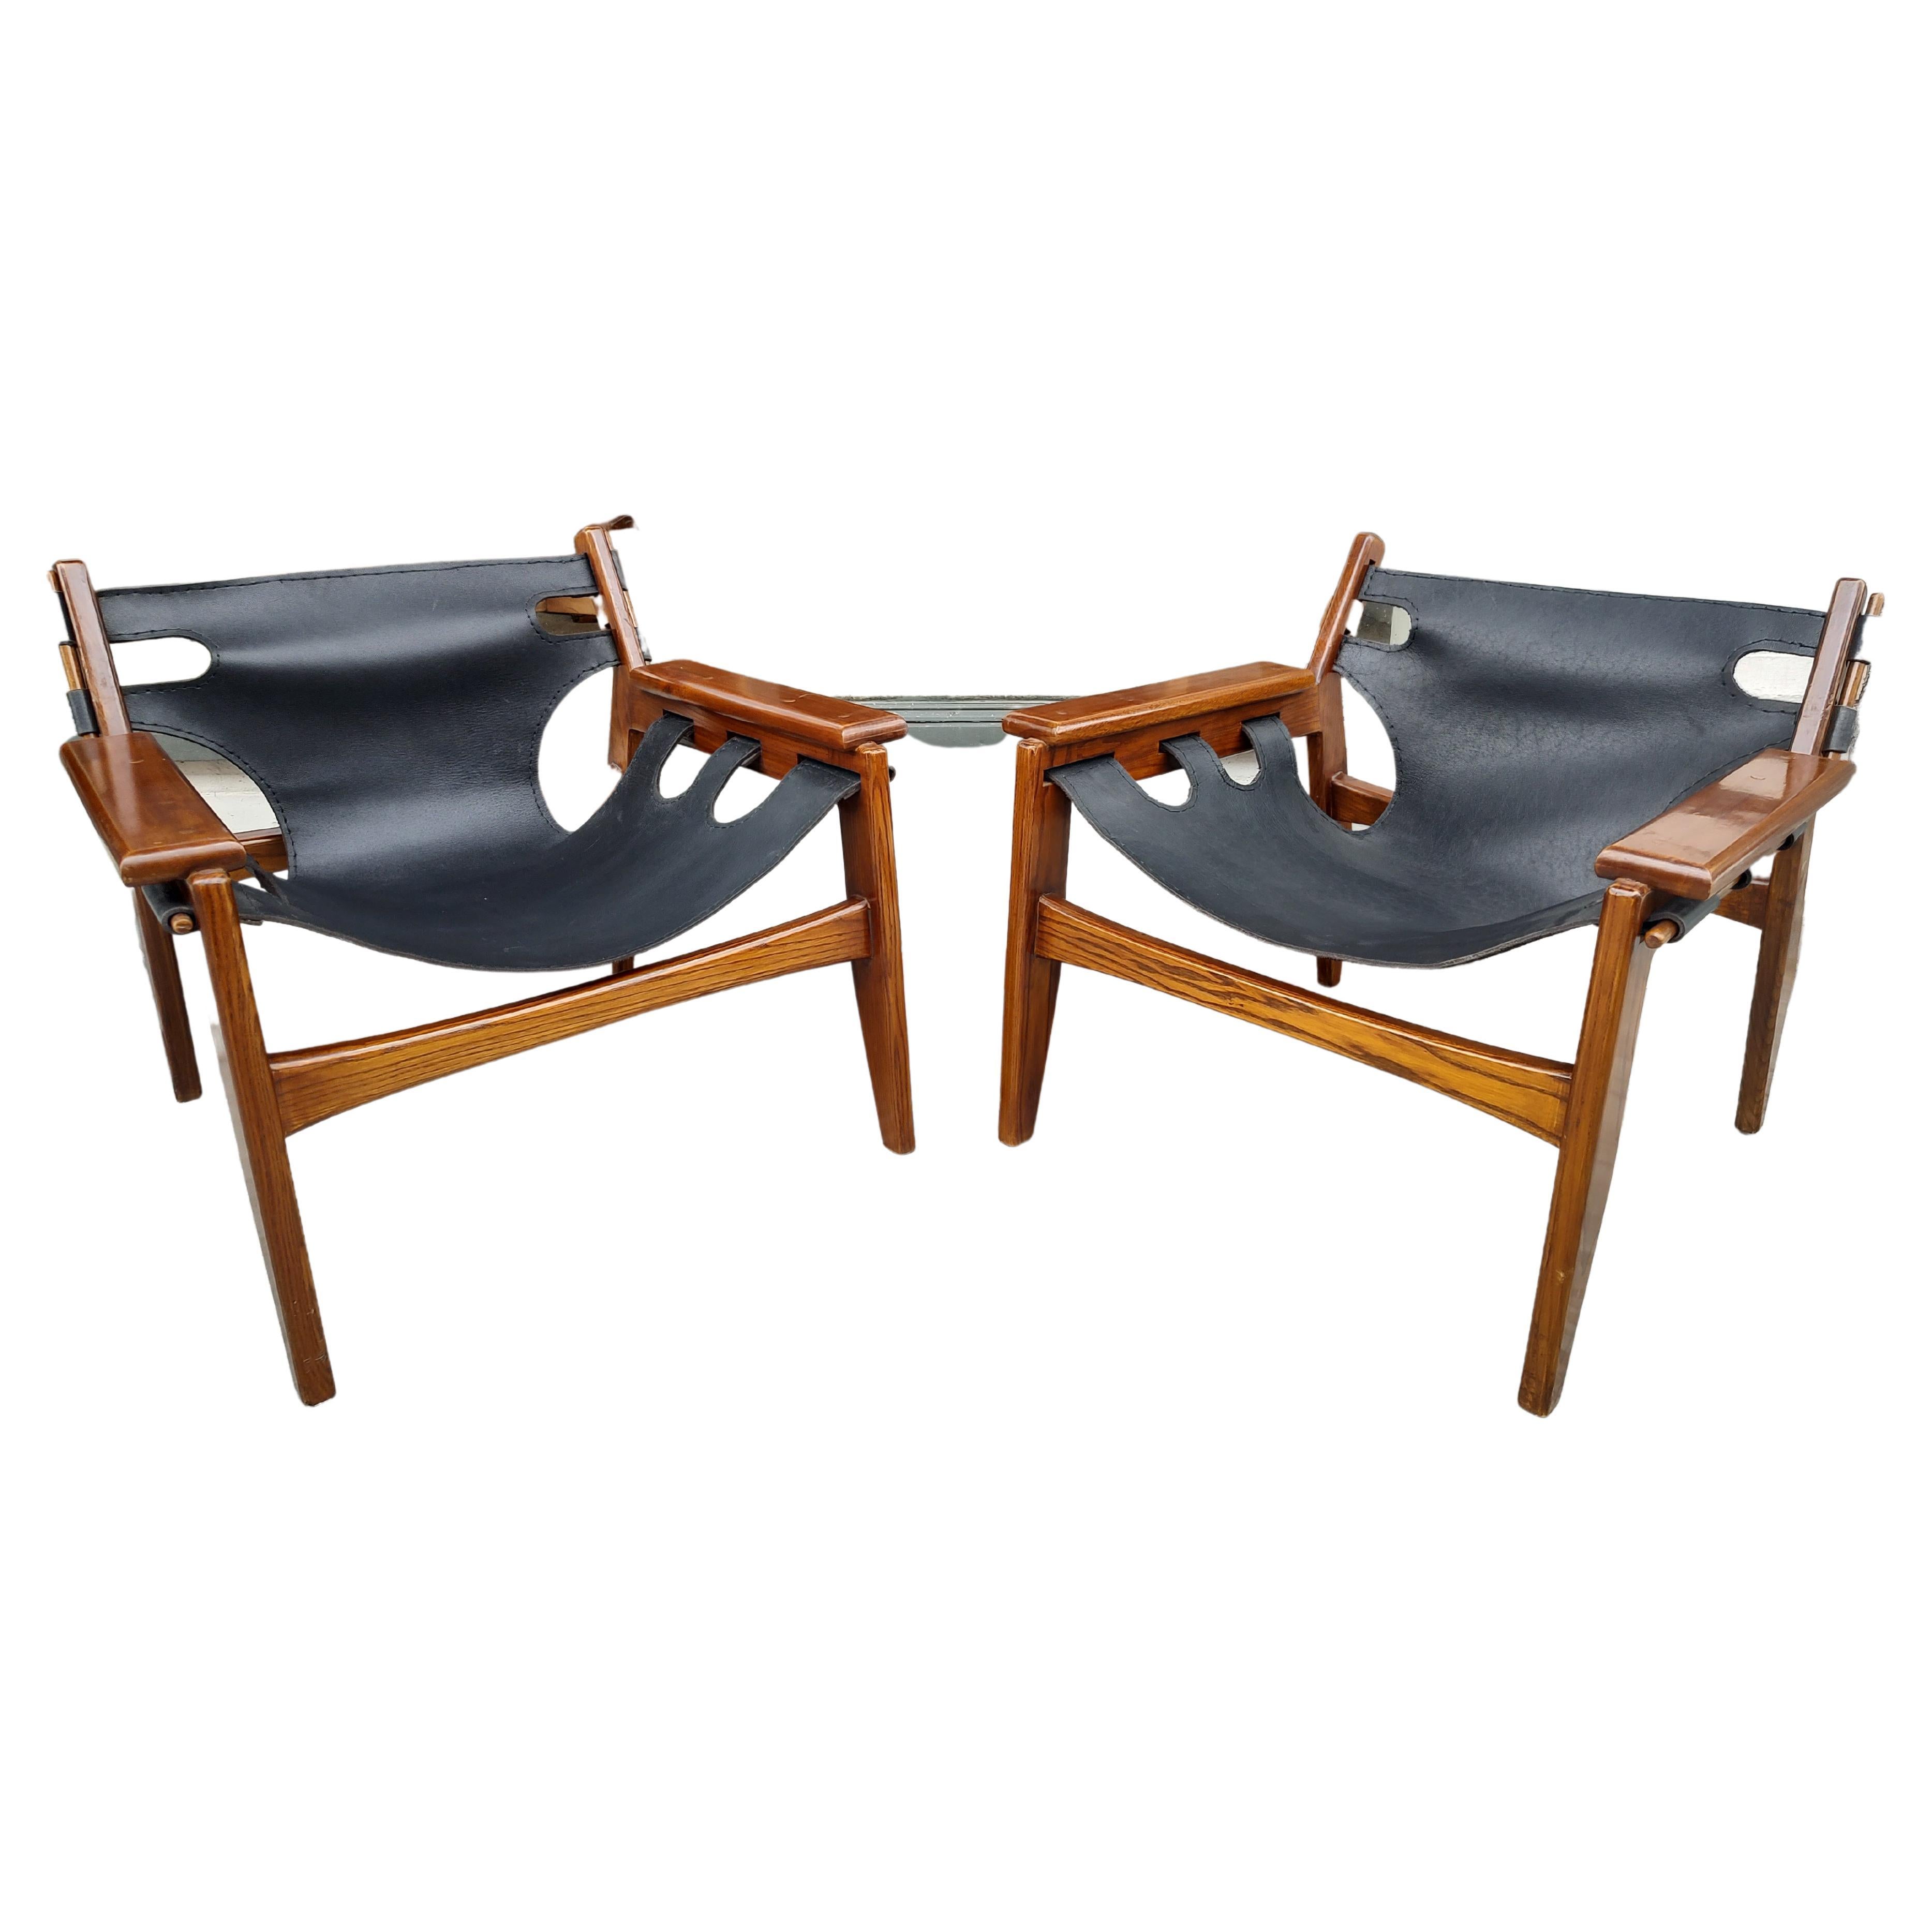 Pair of Mid-Century Modern "Kilin" Lounge Chairs by Sergio Rodrigues for OCA